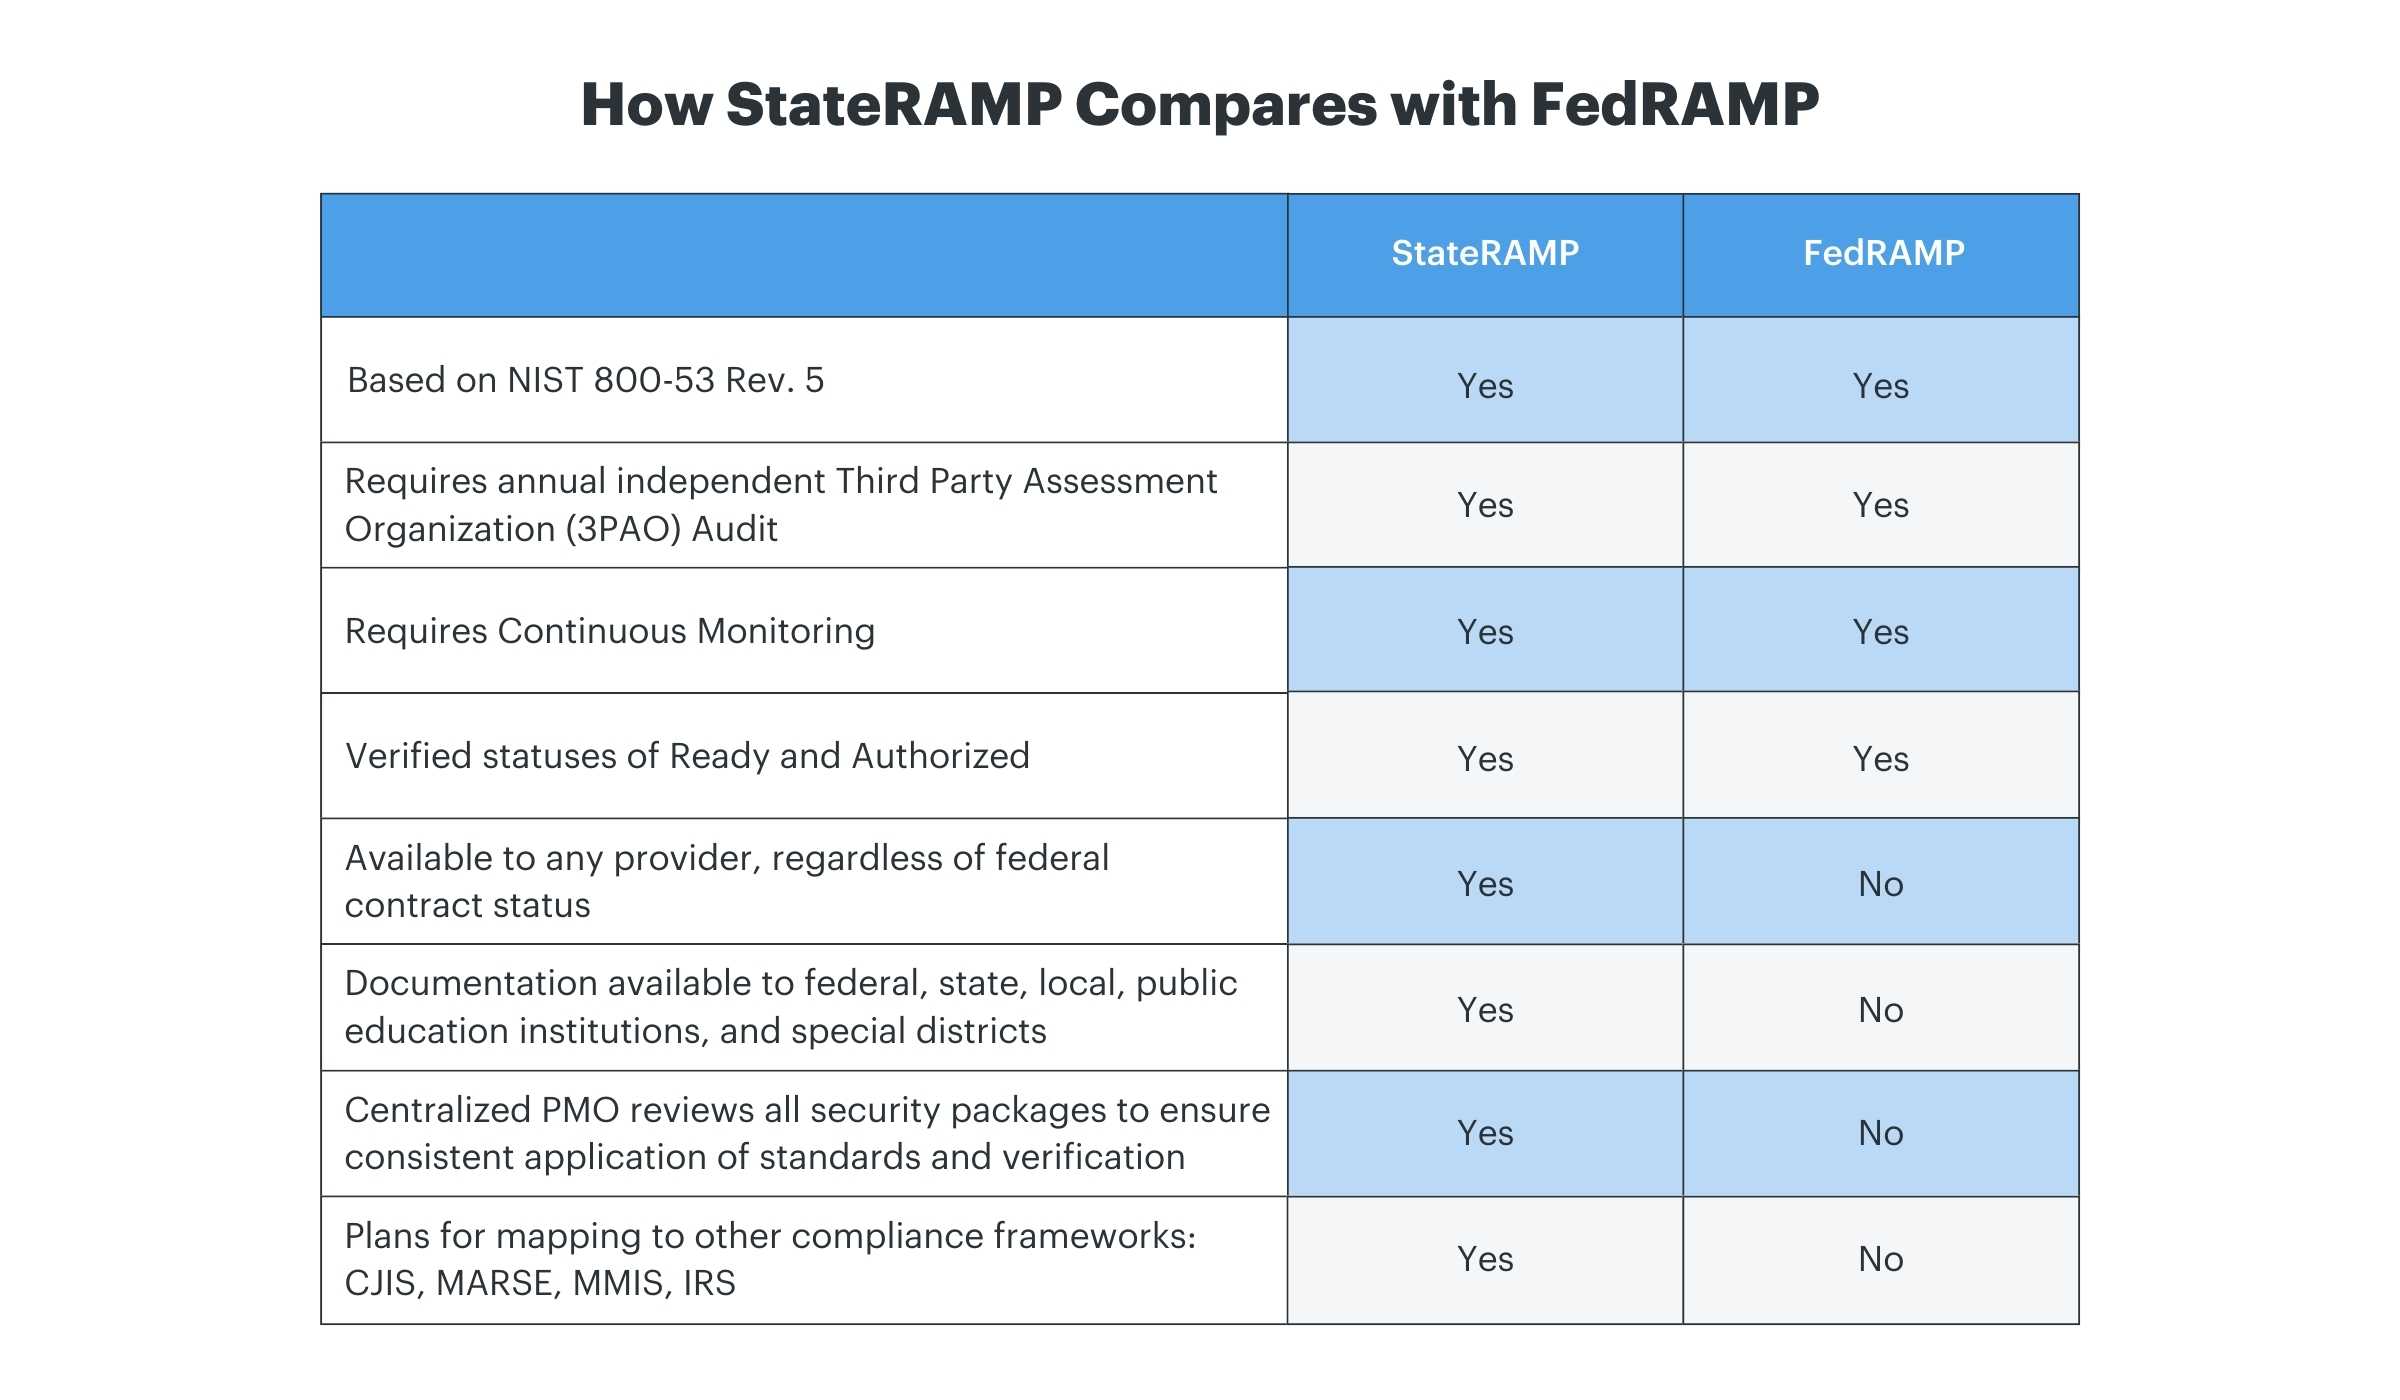 A chart showing specific comparison metrics between FedRAMP and StateRAMP